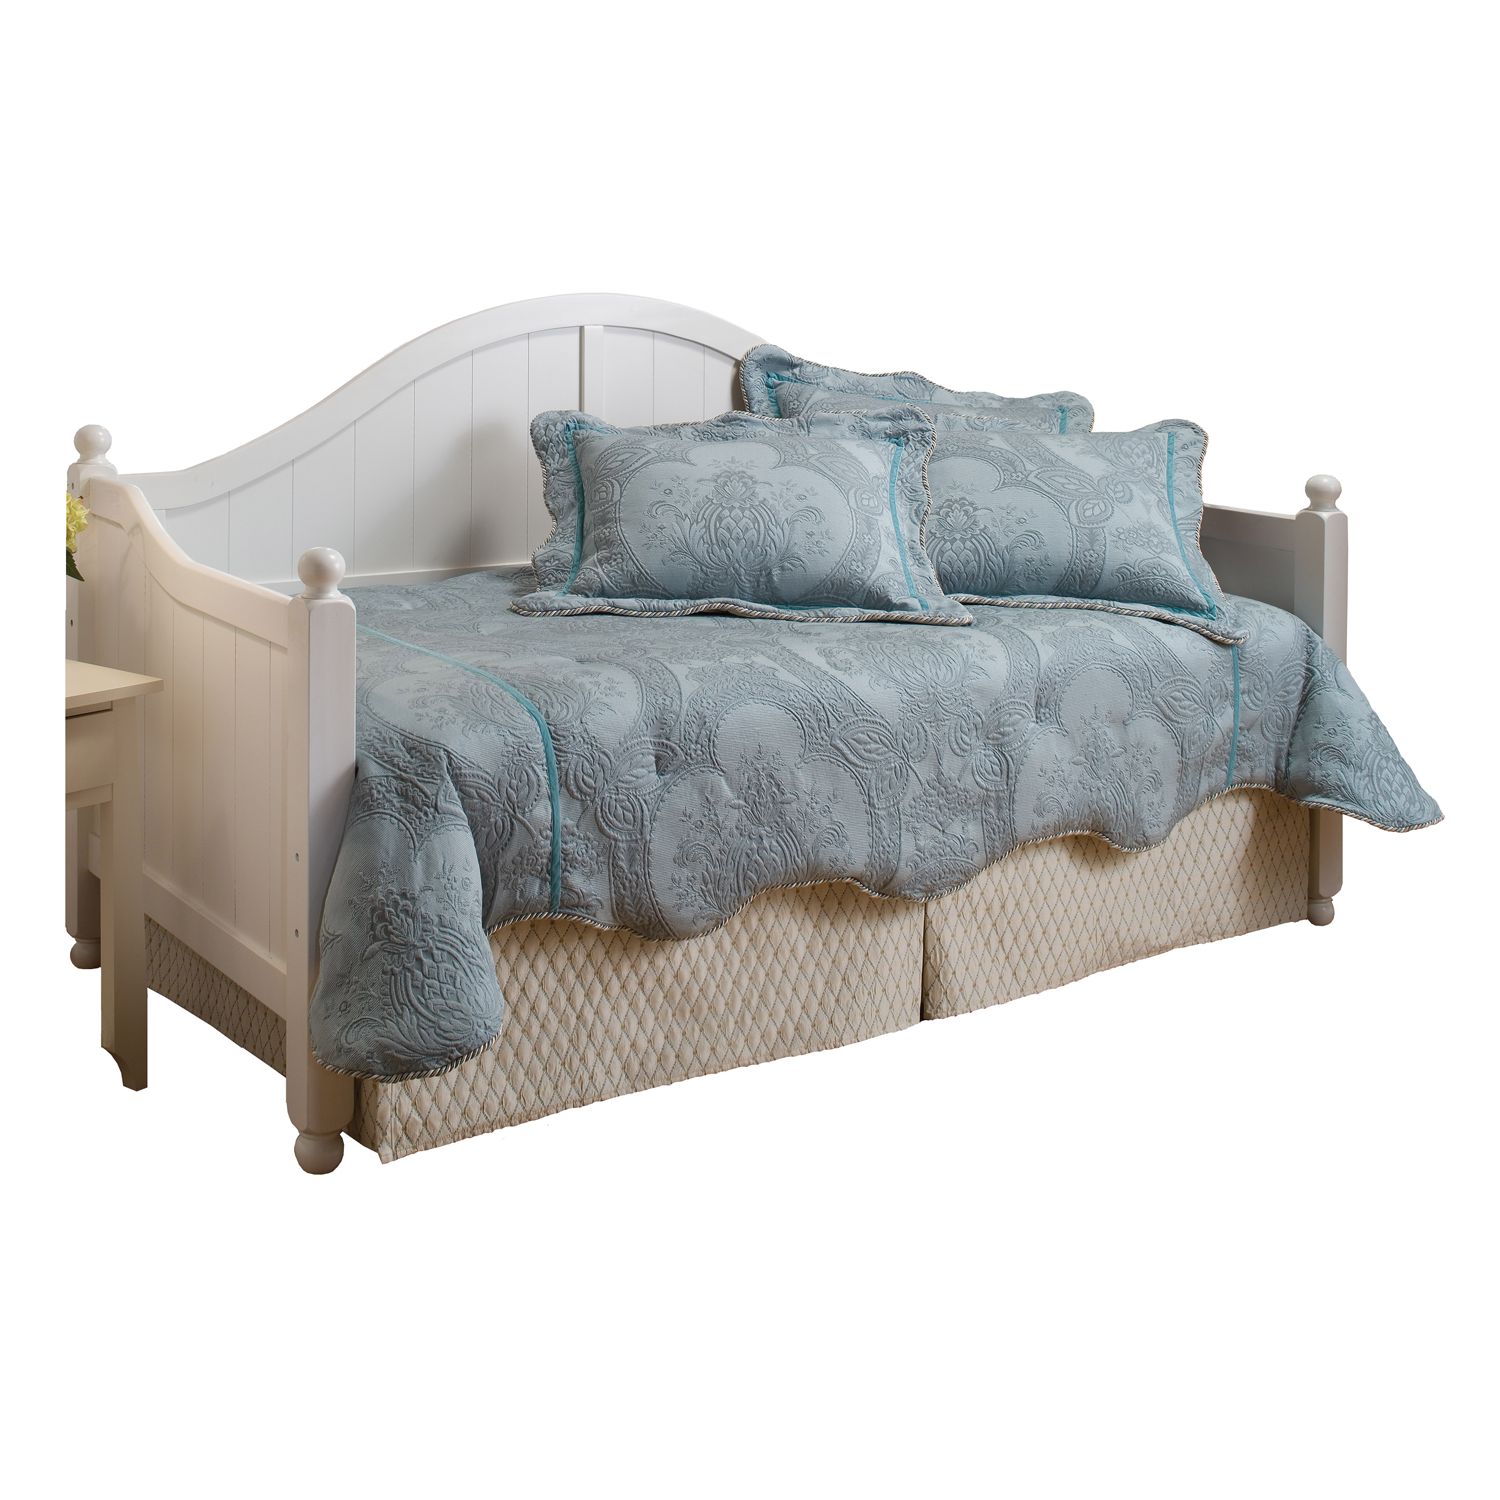 Image for Hillsdale Furniture Augusta Daybed at Kohl's.